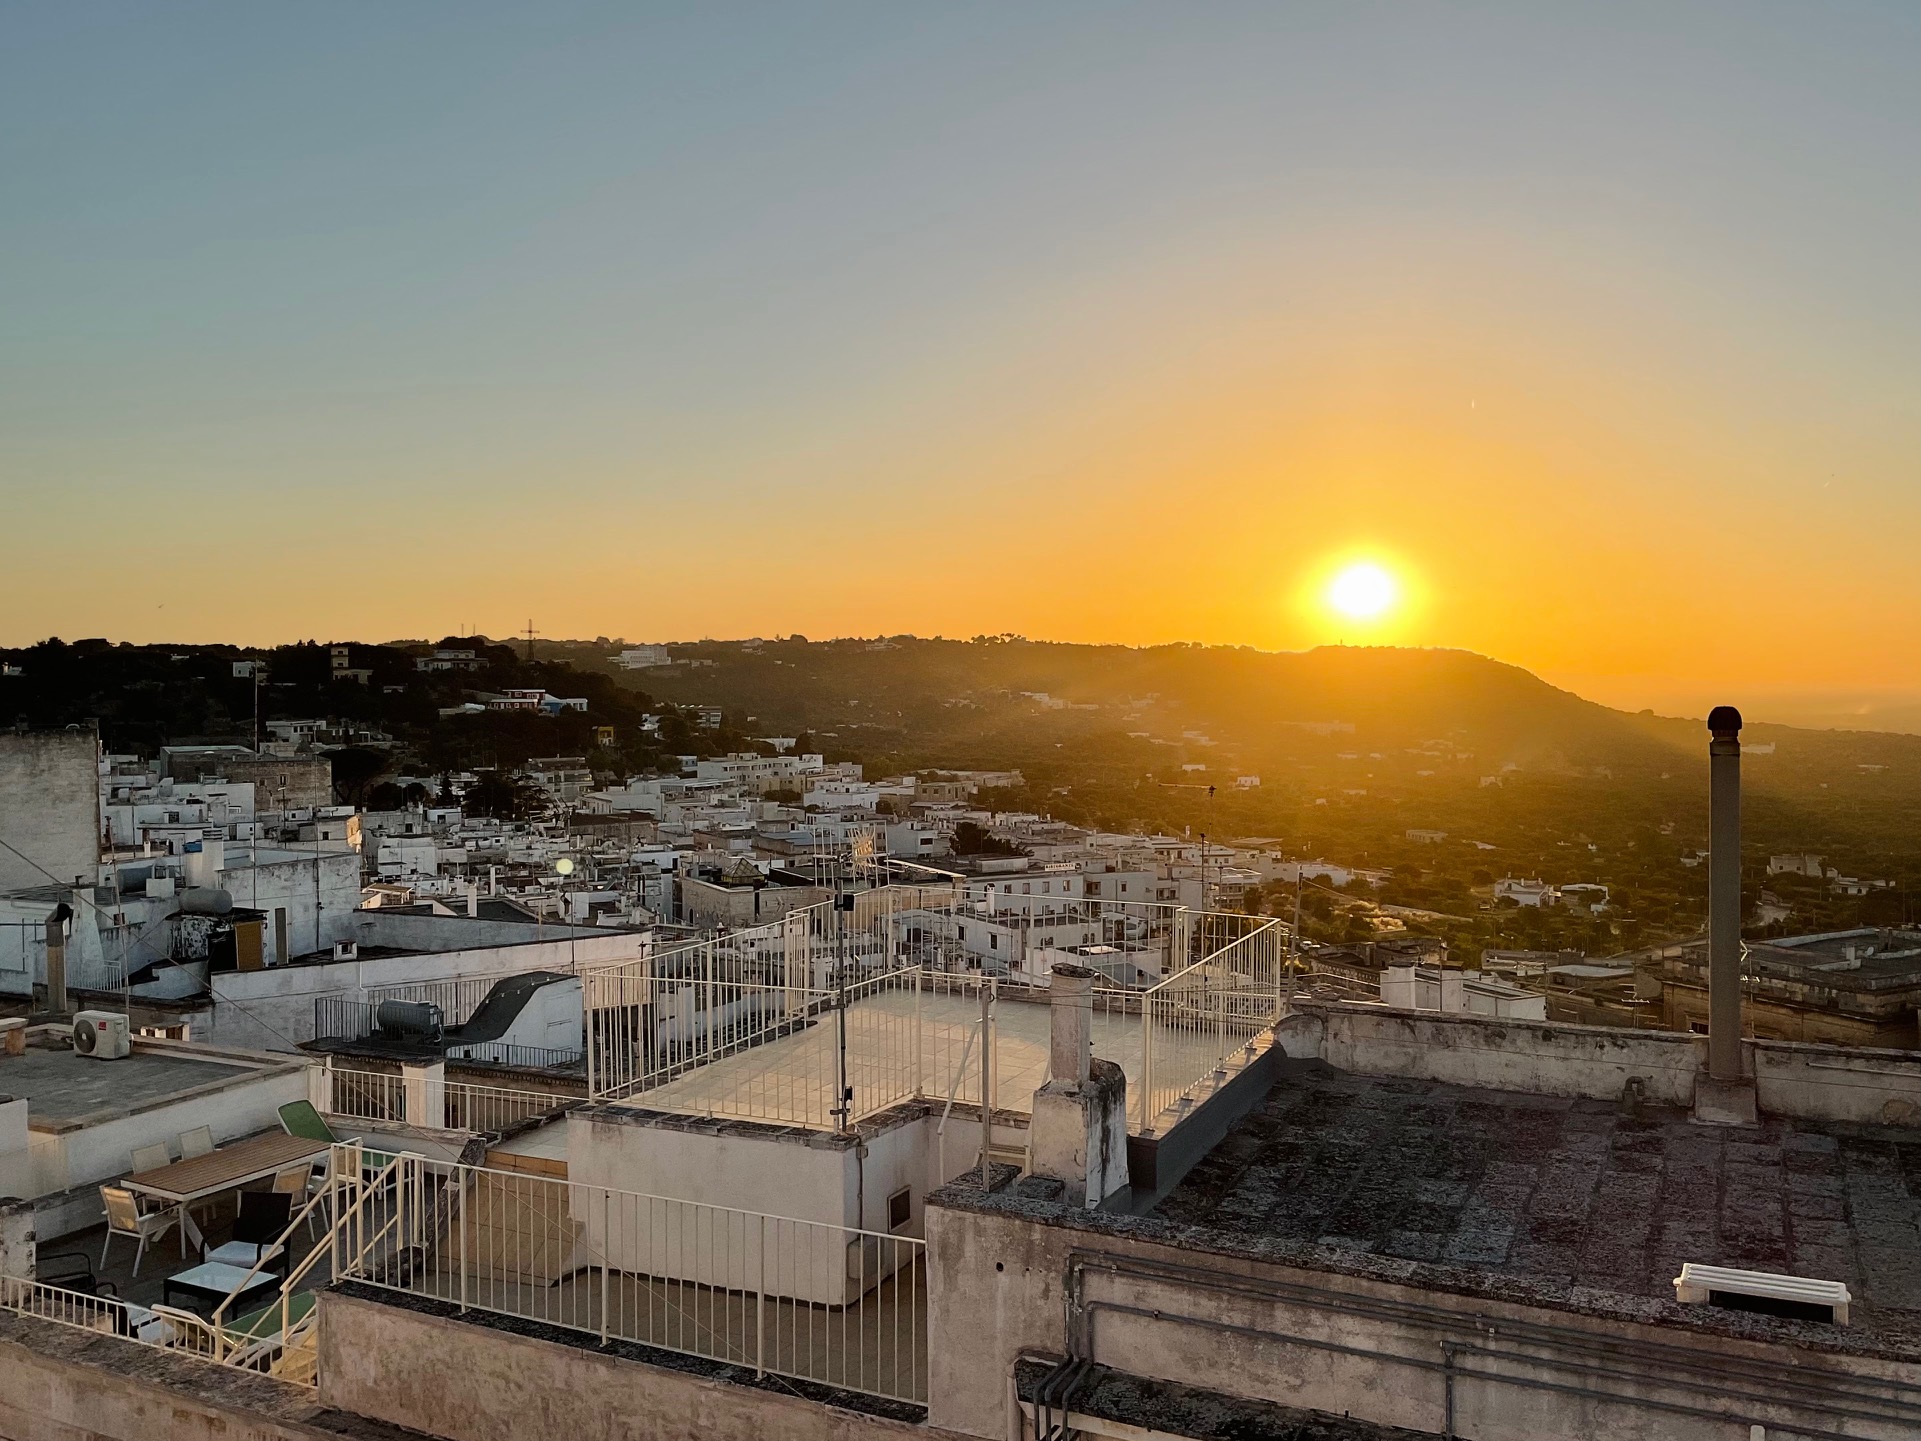 Apartment q|40 is our favorite Ostuni rental apartment based on value, location and style.